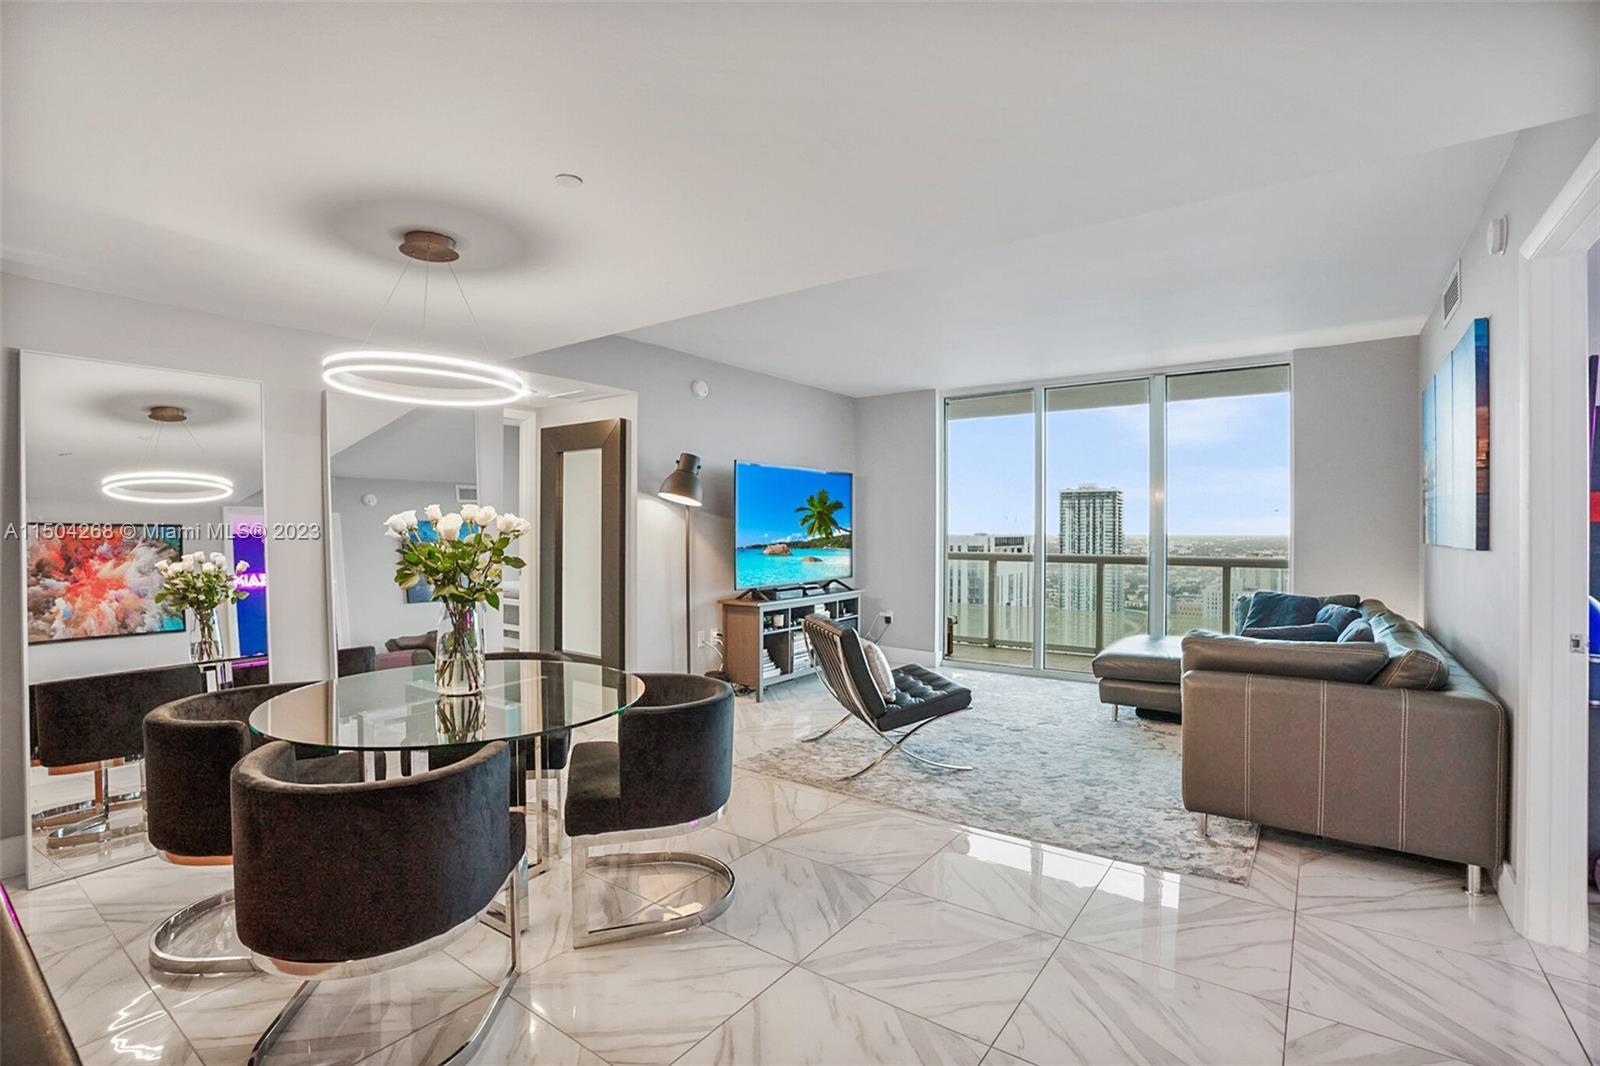 This 46th FL corner unit at 50 Biscayne features 2 Beds, 2 Baths w/ a large wraparound balcony facin